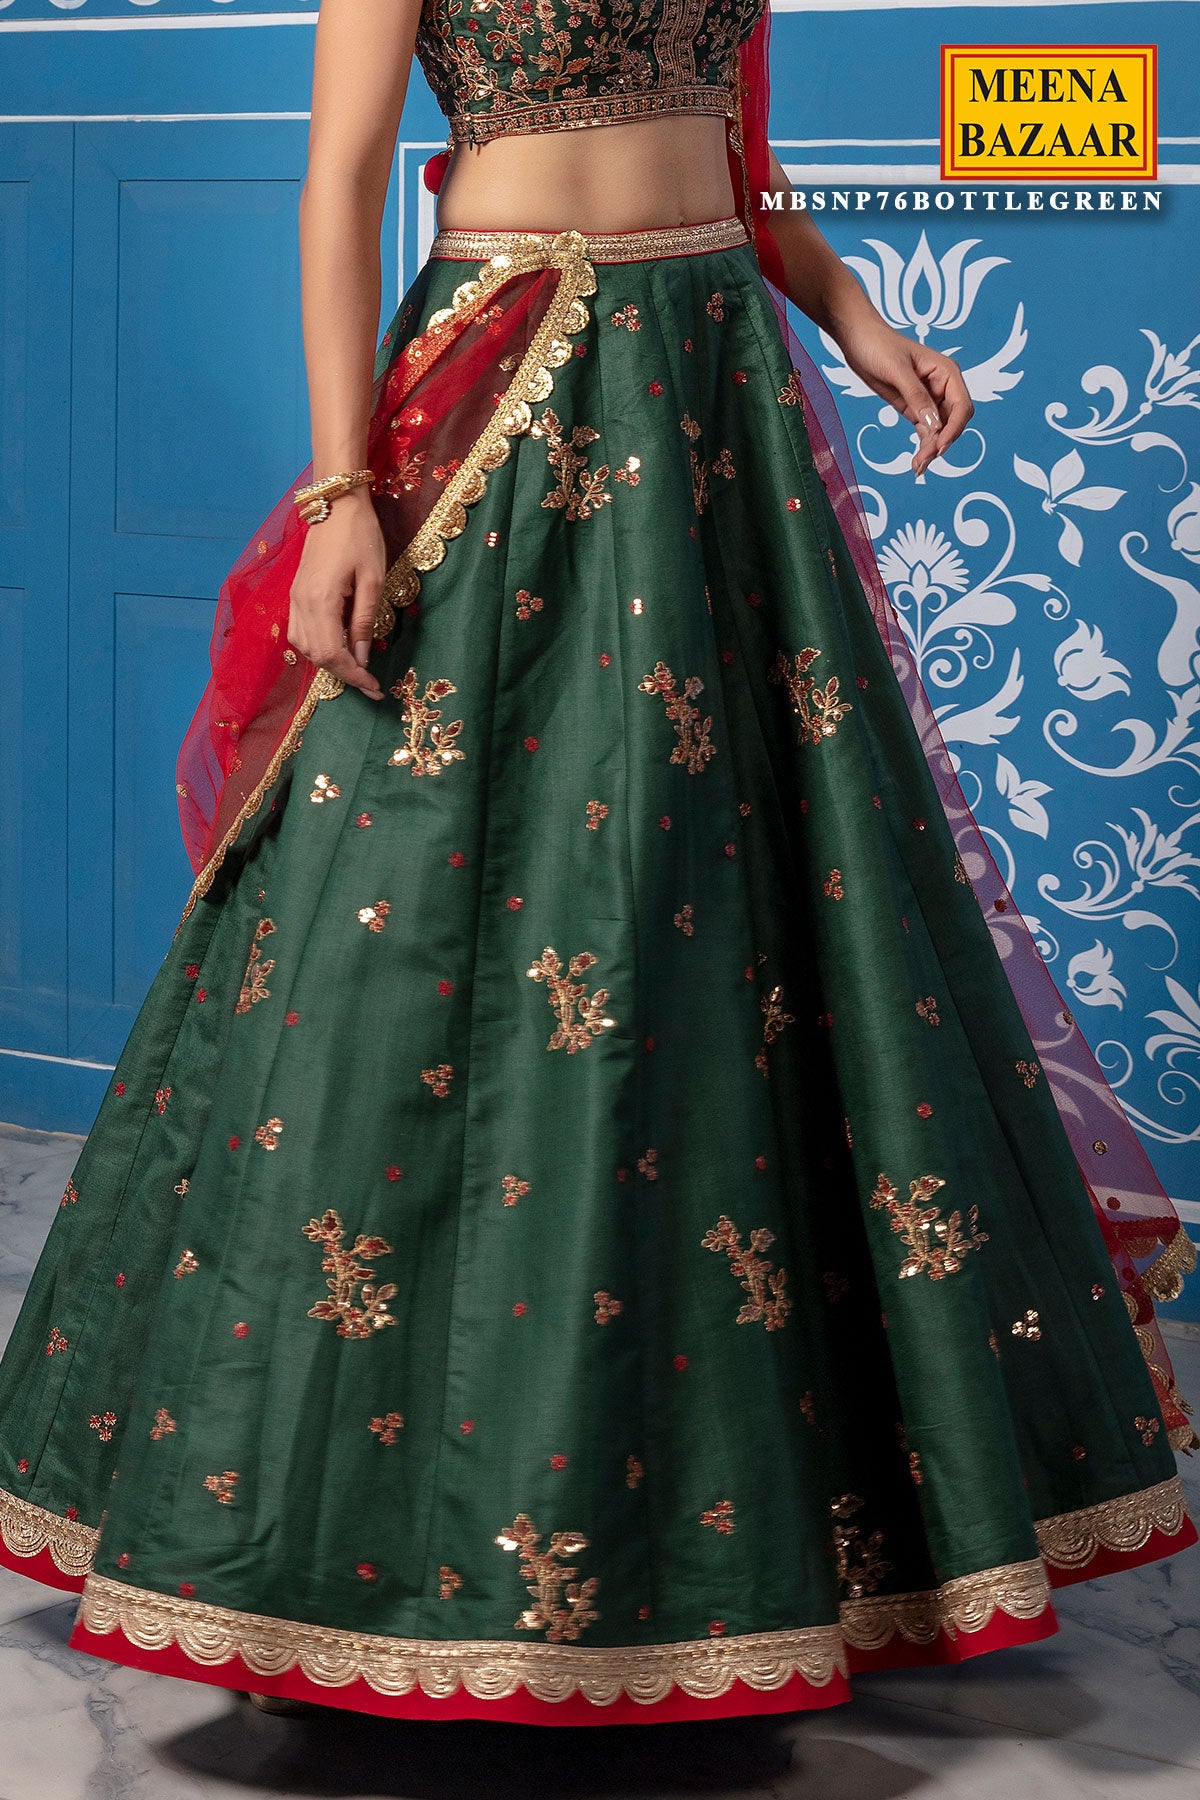 ShaadiKiTyaari Our Velvet Bridal Lehenga with two dupattas, is the perfect  choice for your special wedding entrance! Shop now at… | Instagram